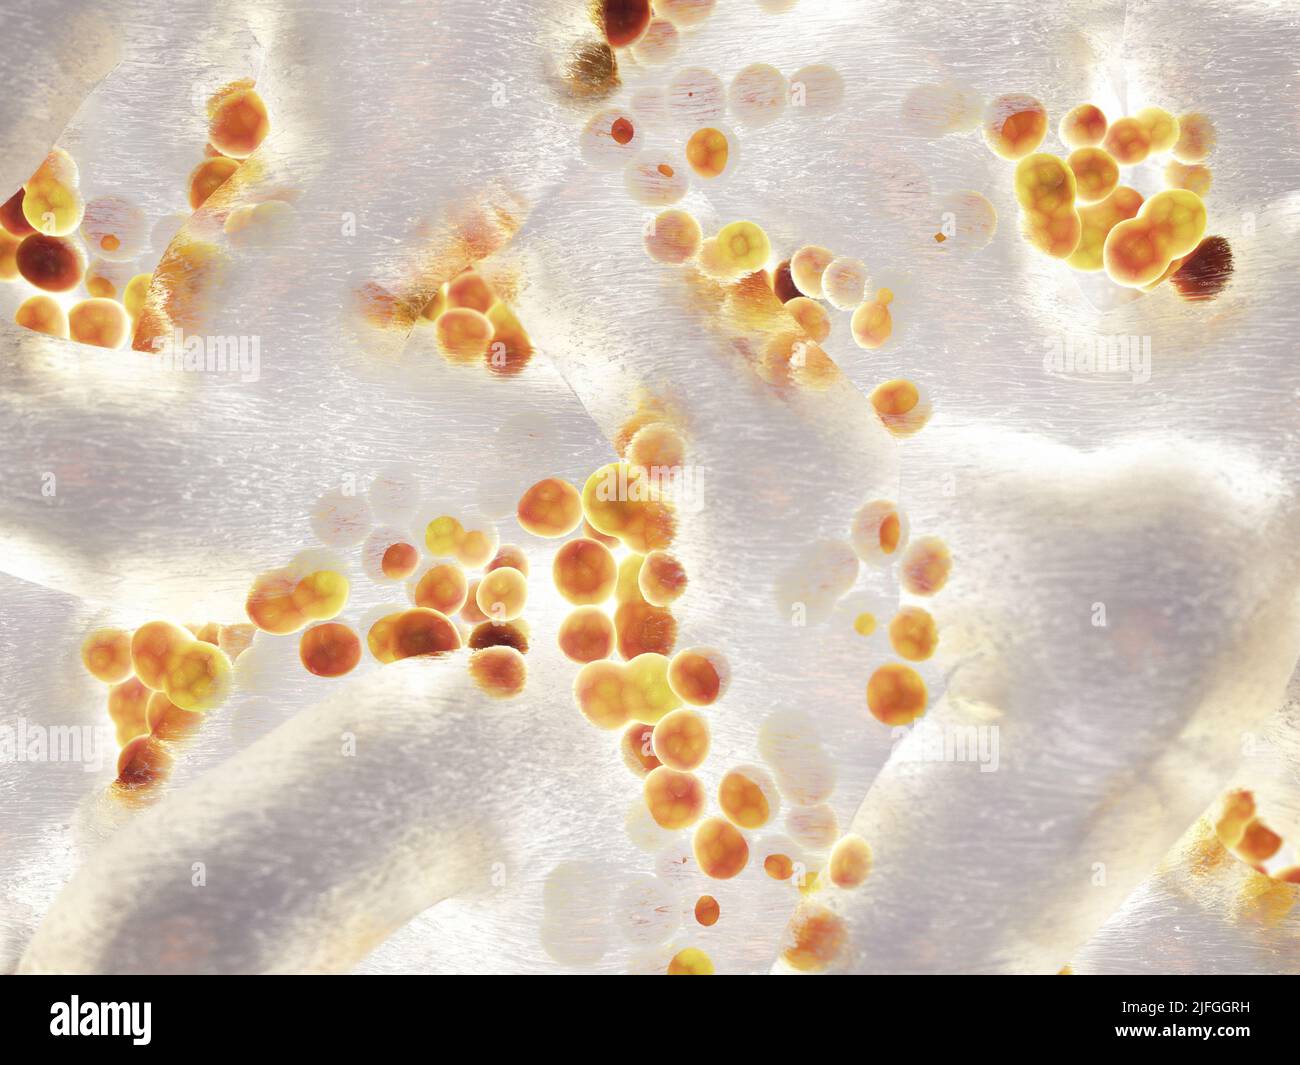 Colony of Staphylococcus aureus bacteria. Staphylococci are the most common cause of biofilm associated infections. Nosocomial infections concept Stock Photo